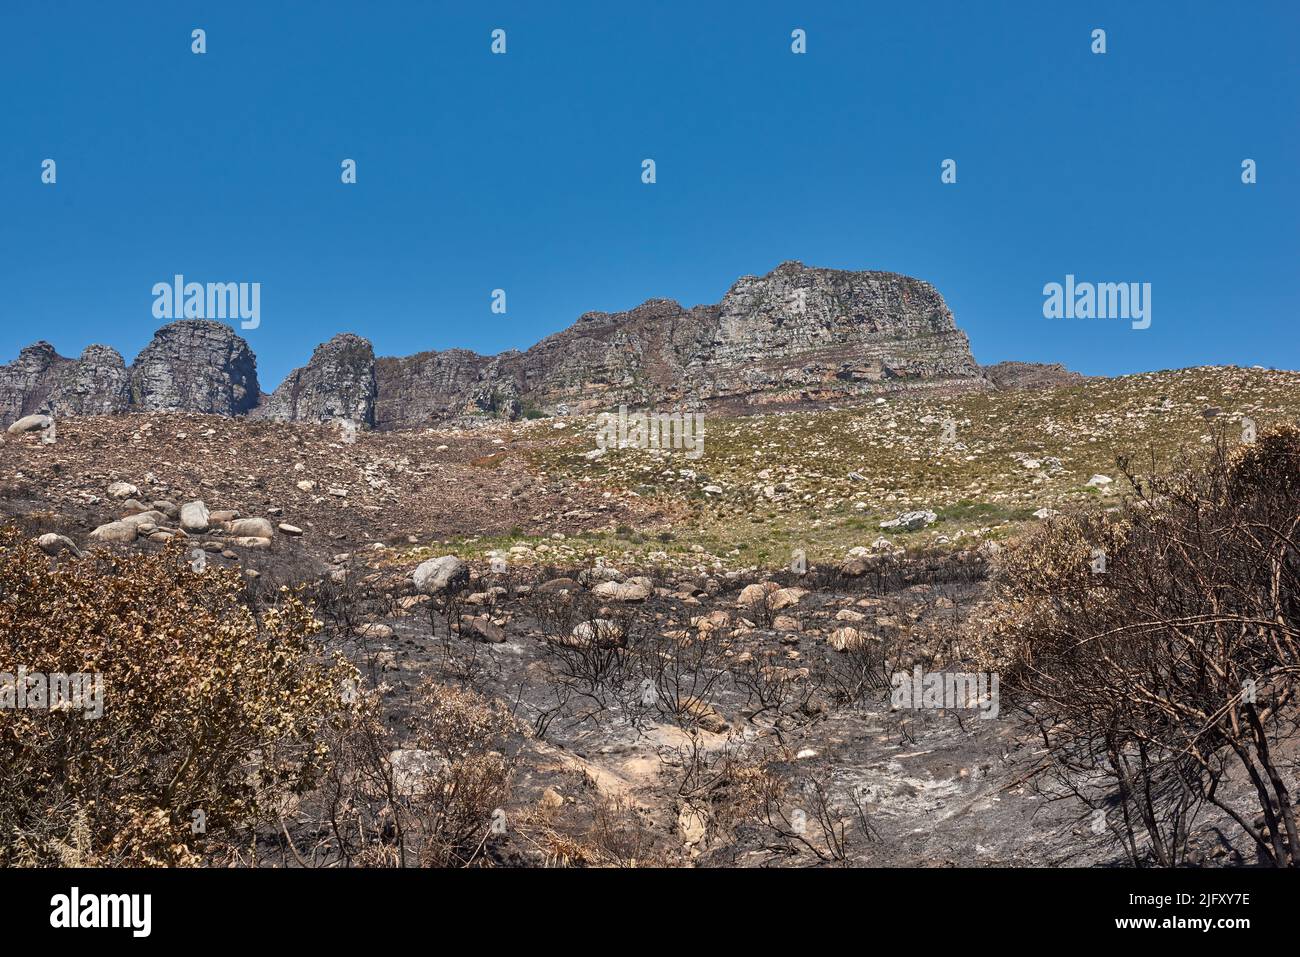 Landscape of burnt trees after a bushfire on Table Mountain, Cape Town, South Africa. Outcrops of a mountain against blue sky with dead bushes. Black Stock Photo